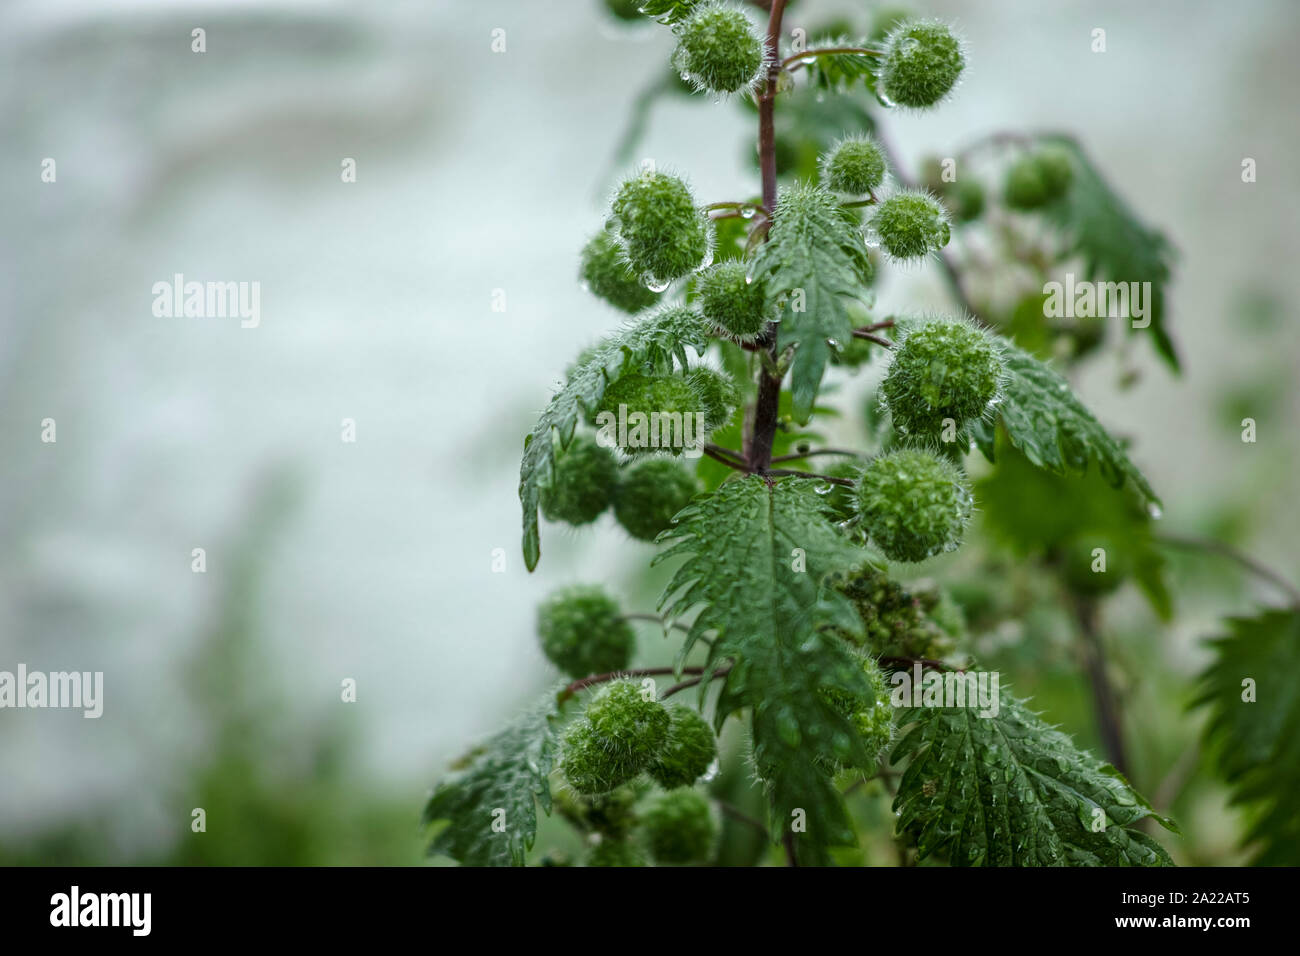 Urtica pilulifera or Roman nettle green plant flowering with small balls in spring season, botany background Stock Photo